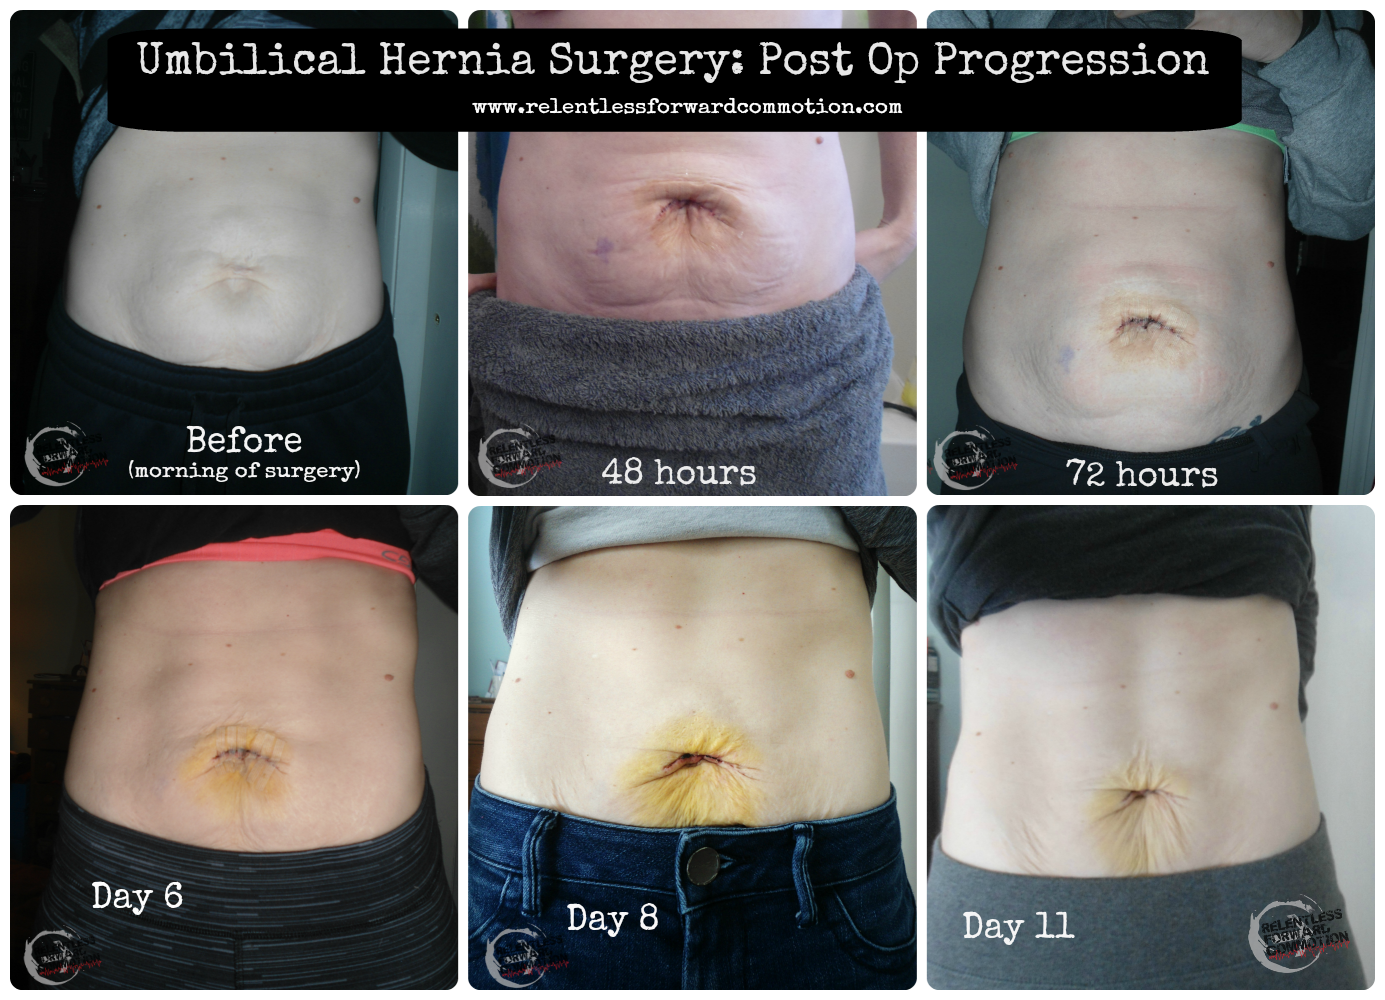 Umbilical Hernia Surgery Recovery Progression